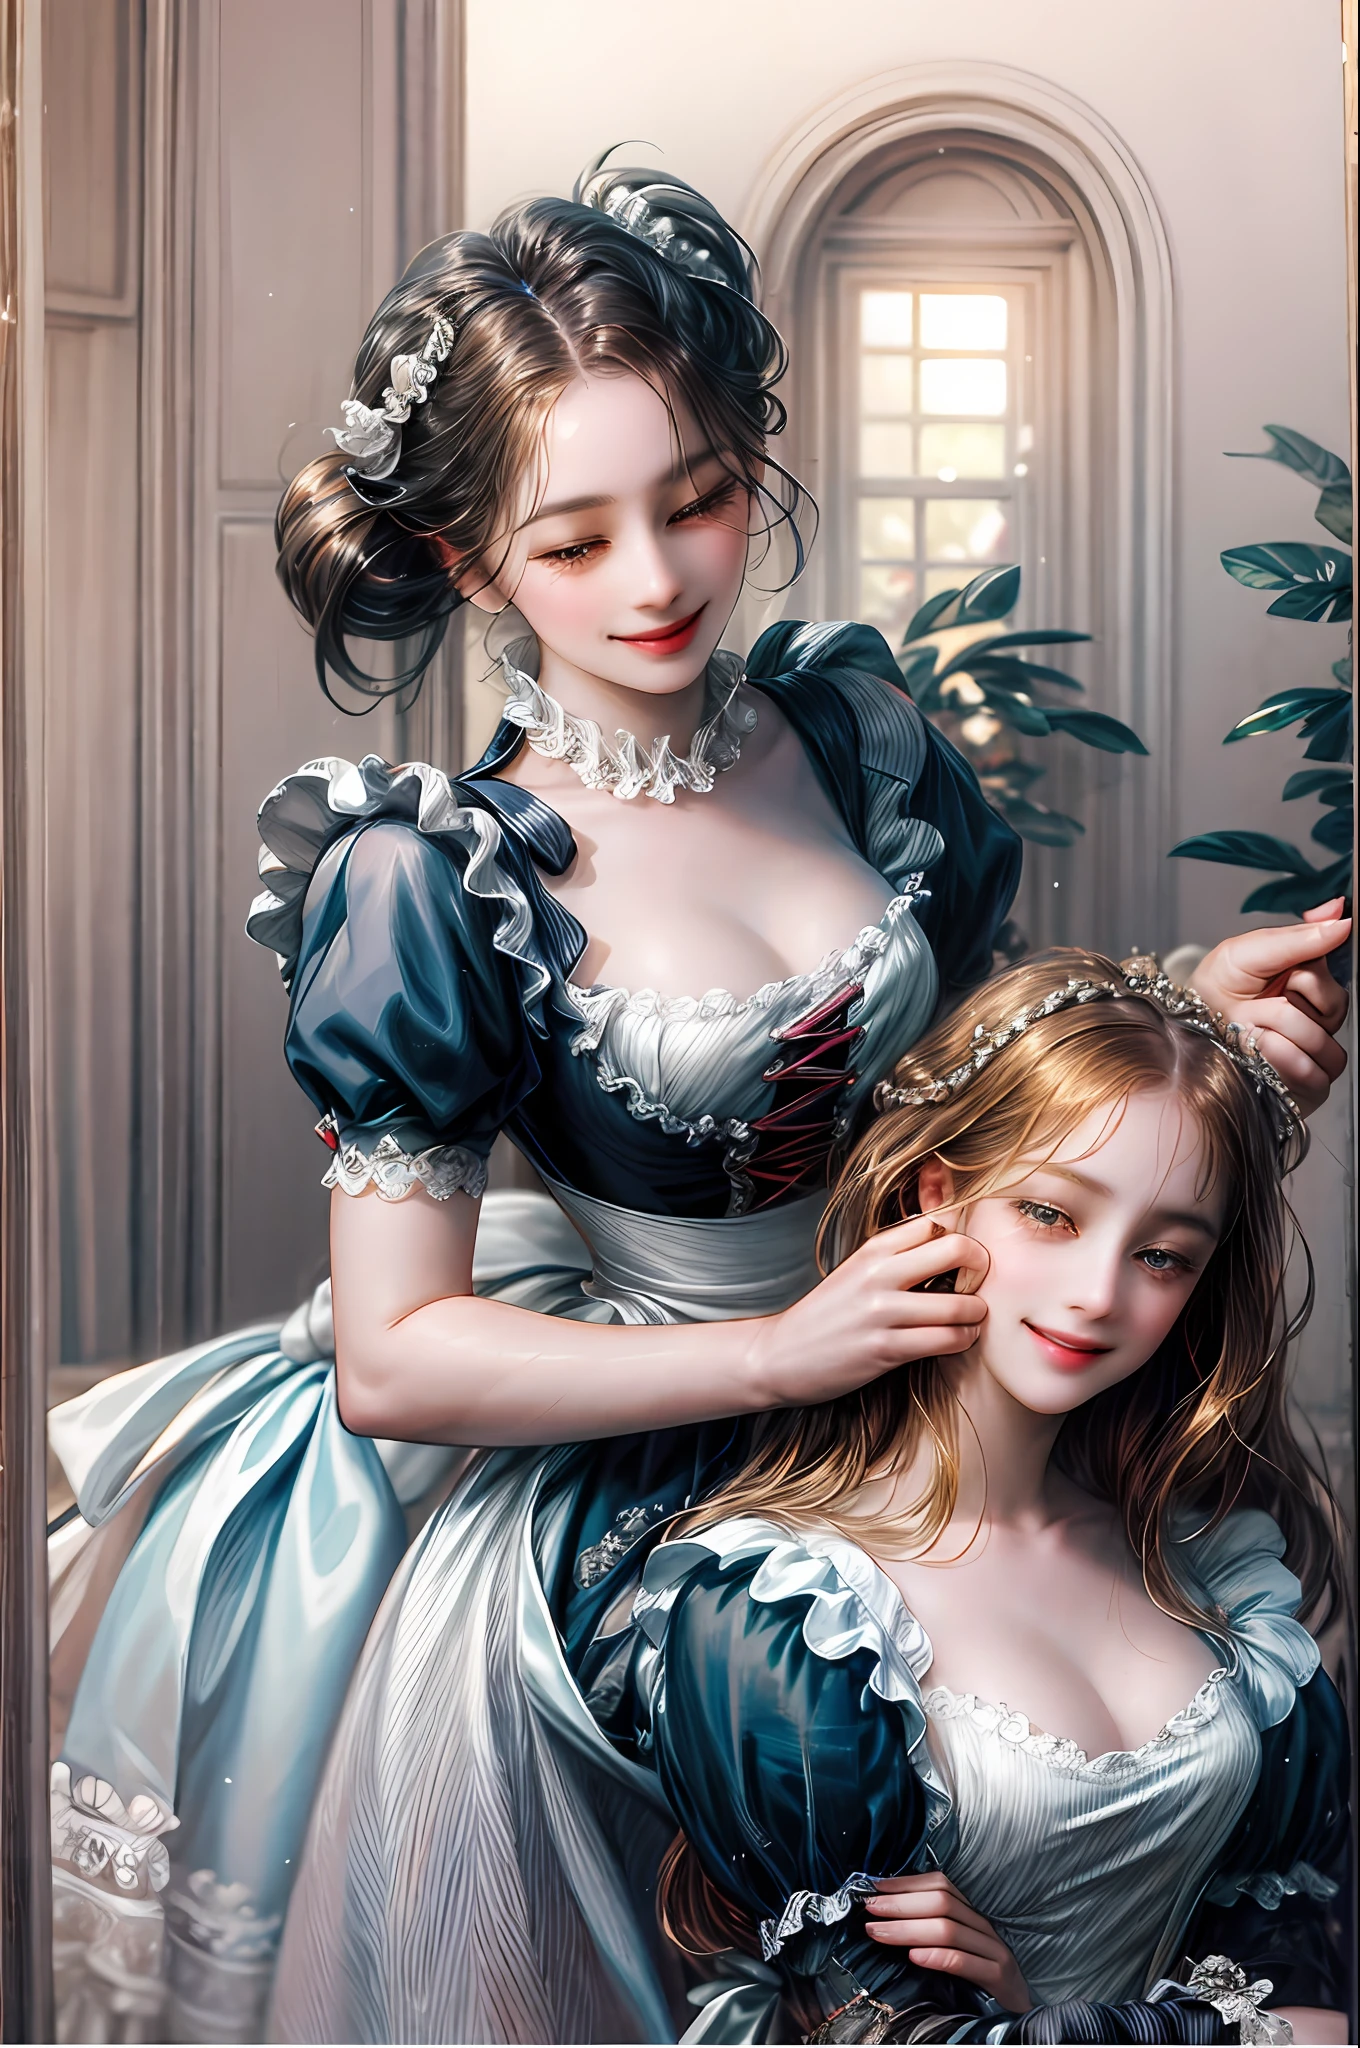 Two girls a maid and a lady the maid helps her change the noble lady smiled happily as the maid helps her